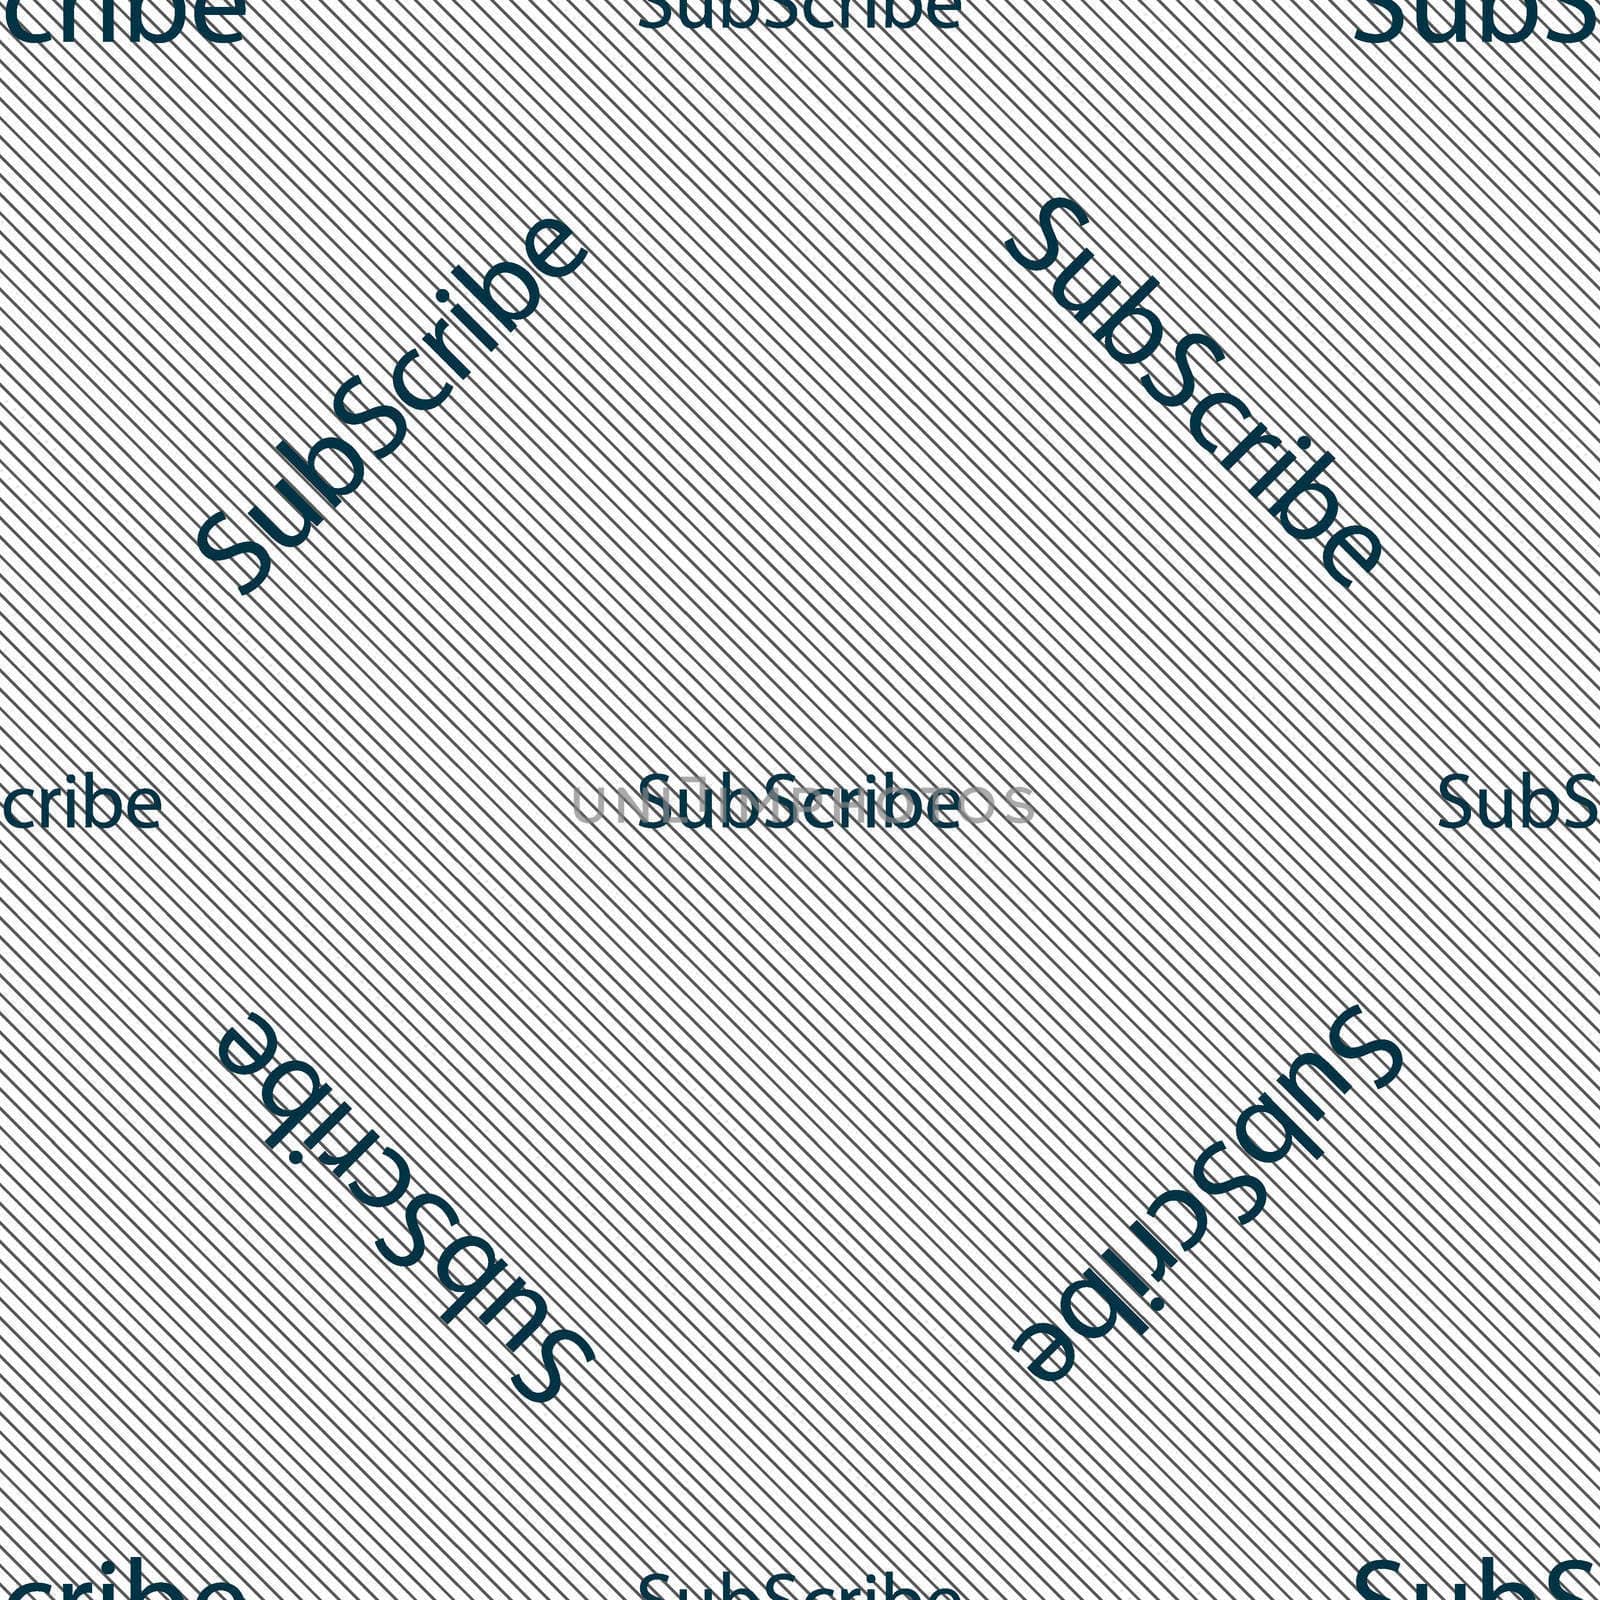 Subscribe sign icon. Membership symbol. Website navigation. Seamless pattern with geometric texture. illustration